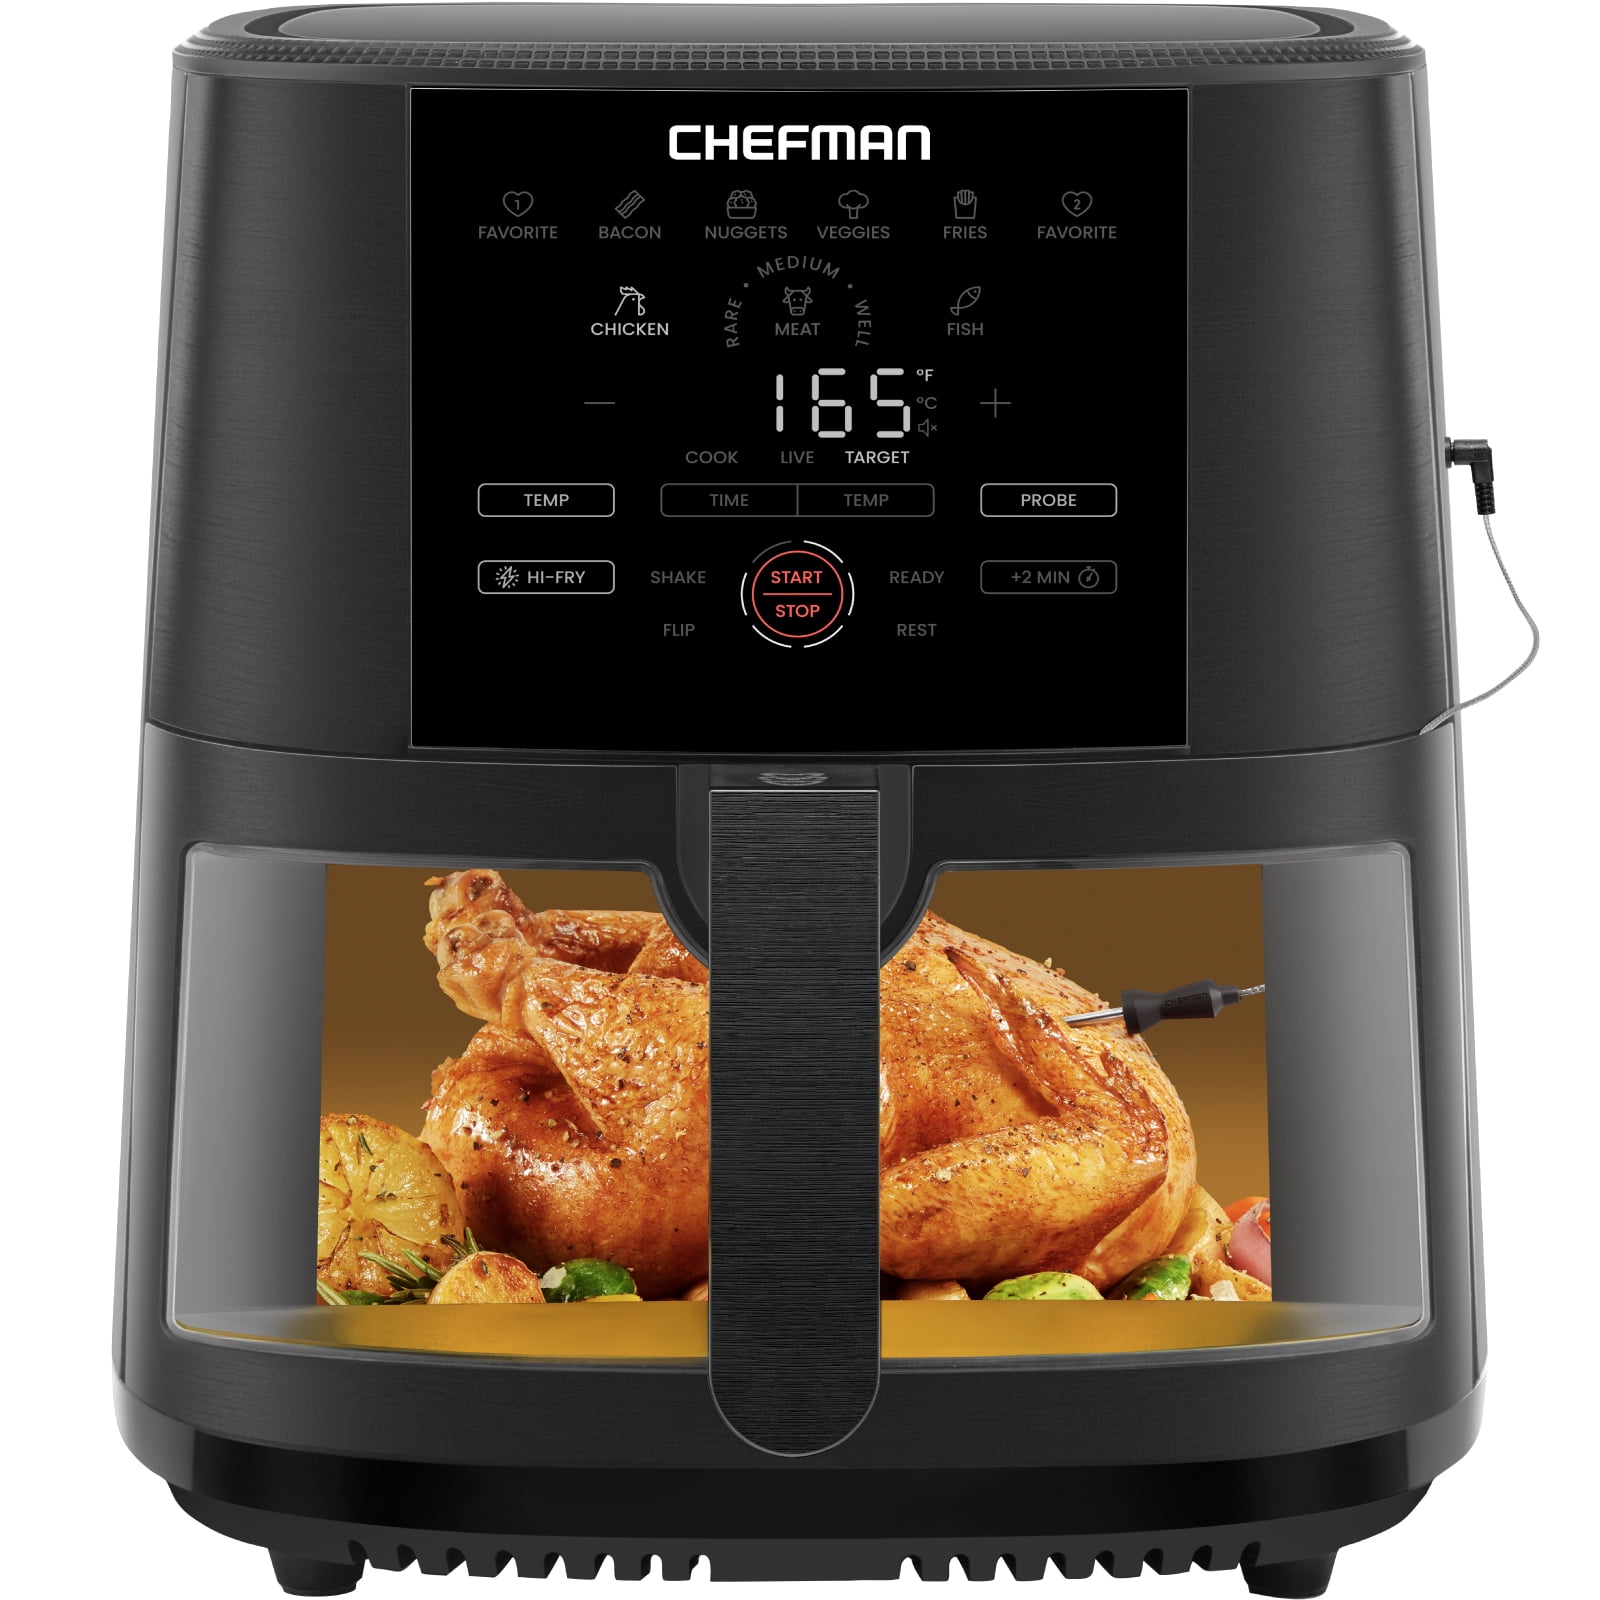 Chefman Black 8 Quart Air Fryer with Cooking Thermometer, 8 Presets, Nonstick, Easy-View Window